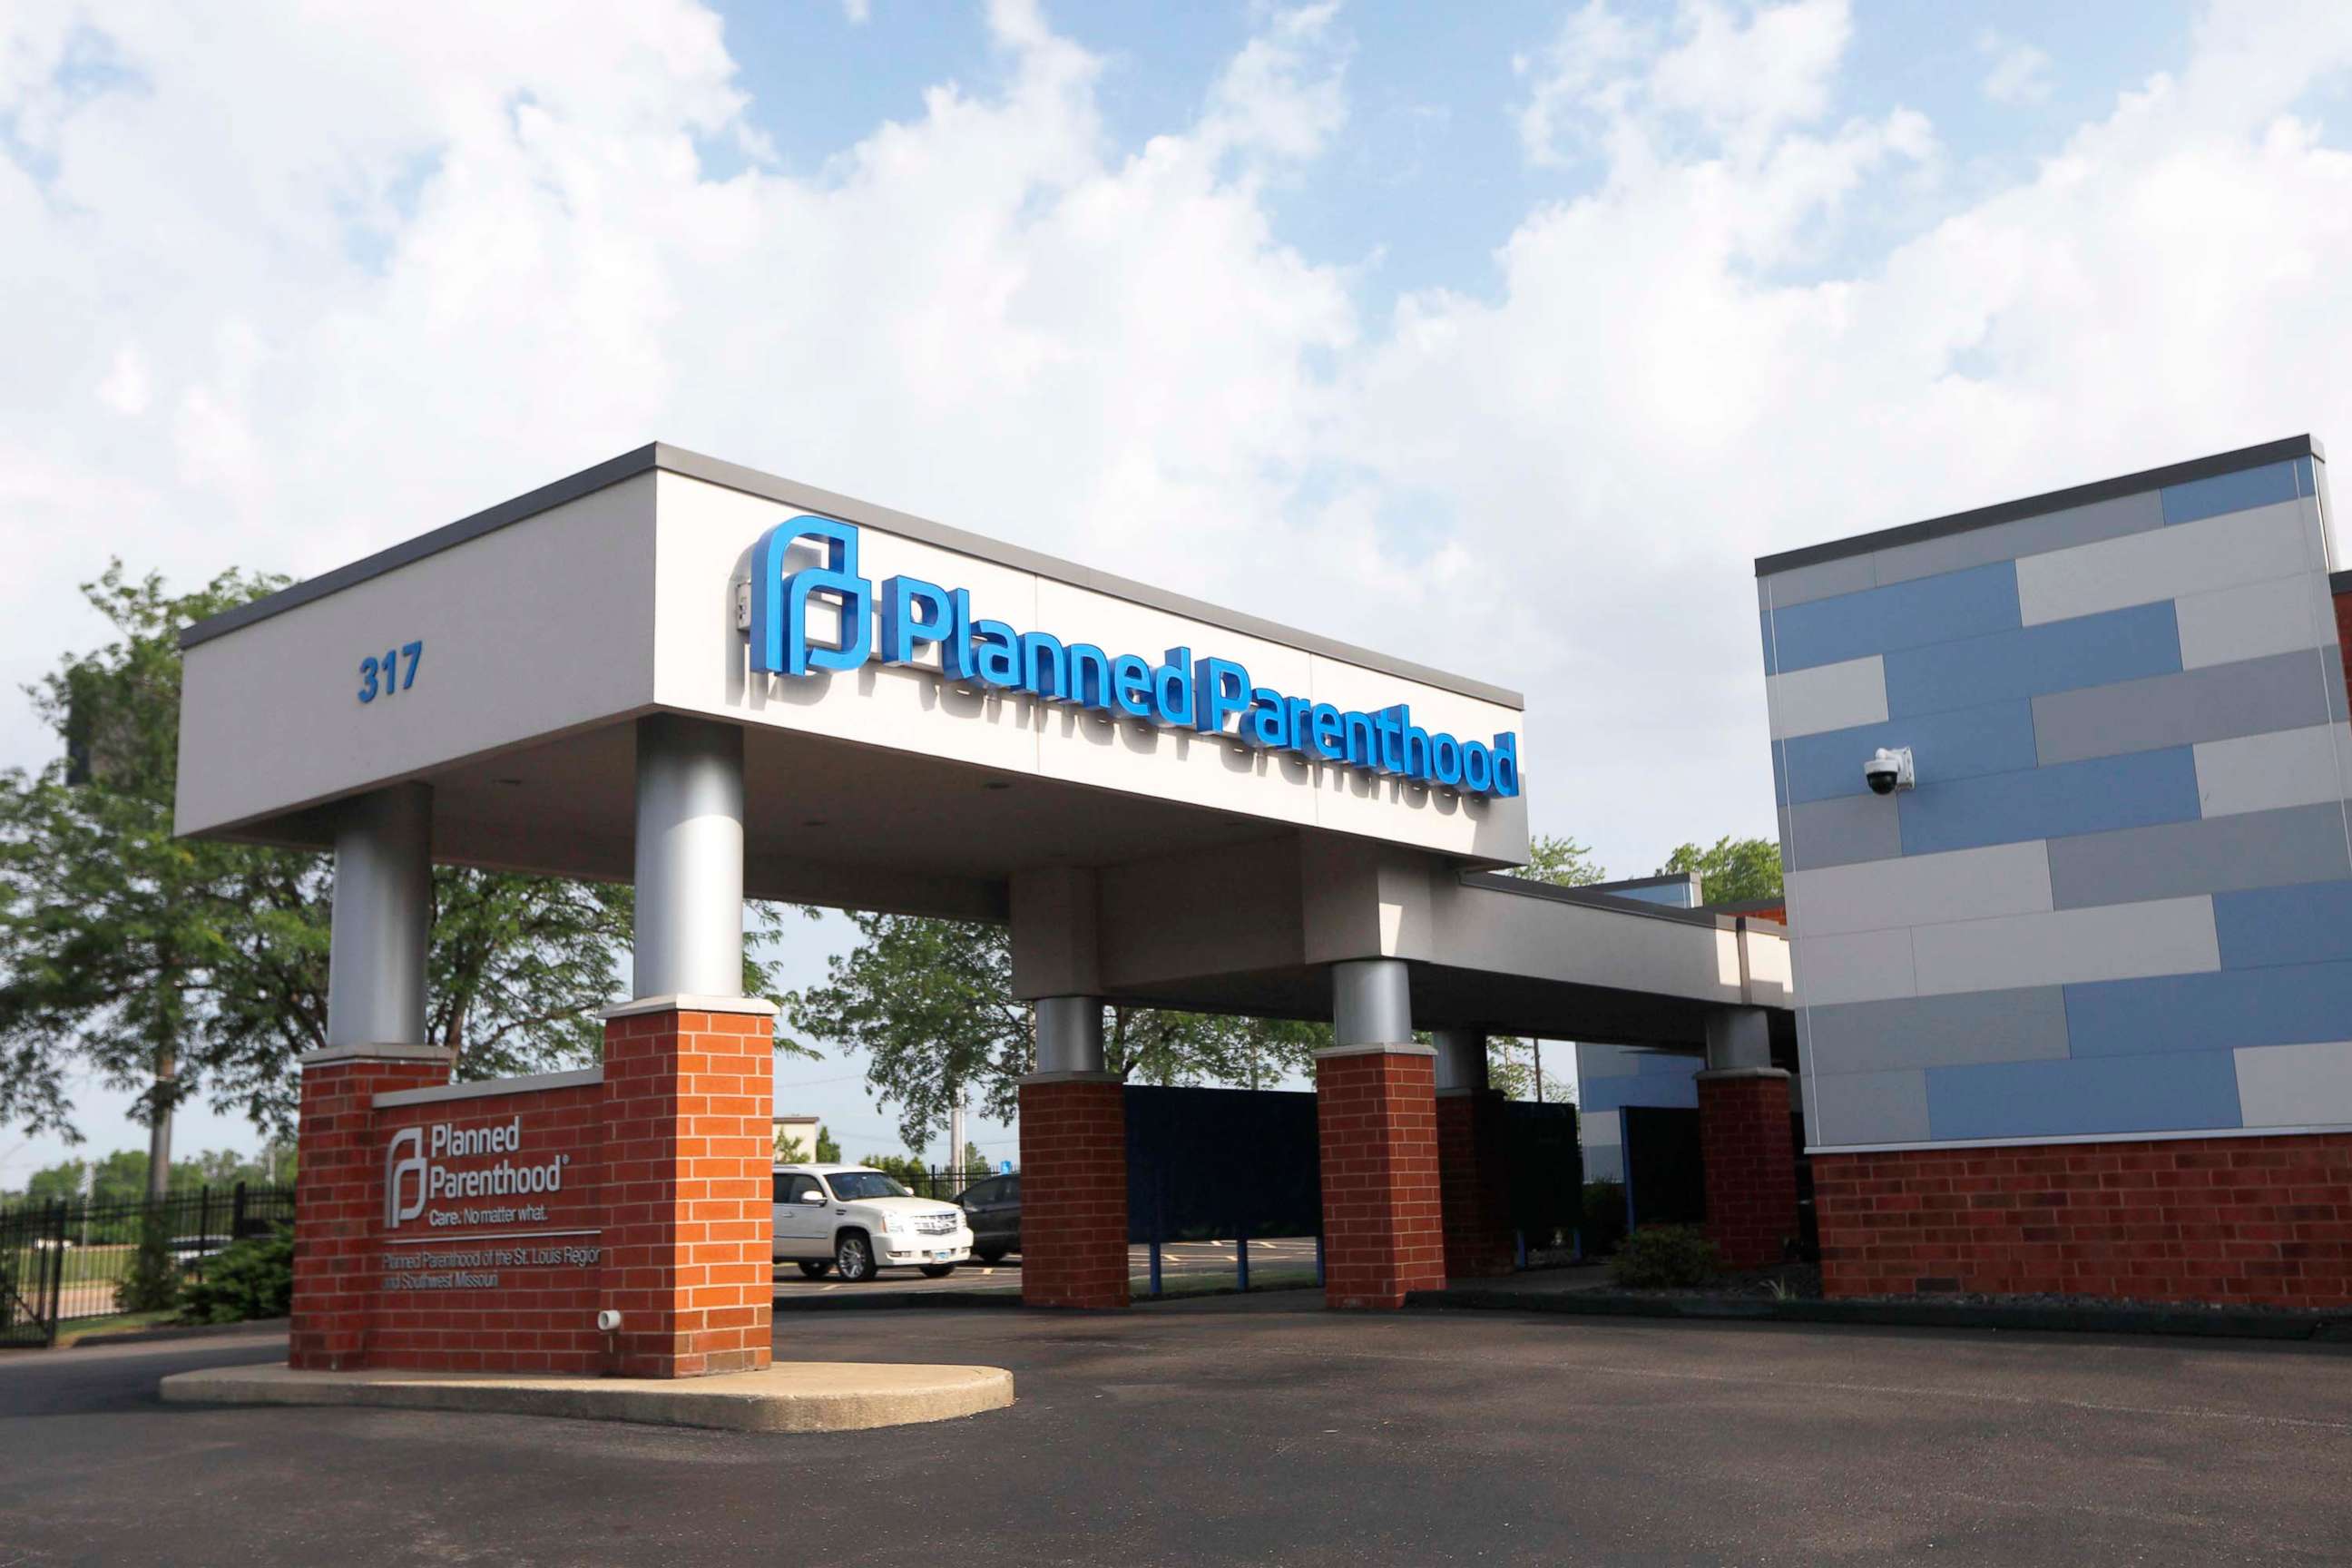 PHOTO: The exterior of the Planned Parenthood-Fairview Heights Health Center is shown in Fairview Heights, Illinois, on June 16, 2022.